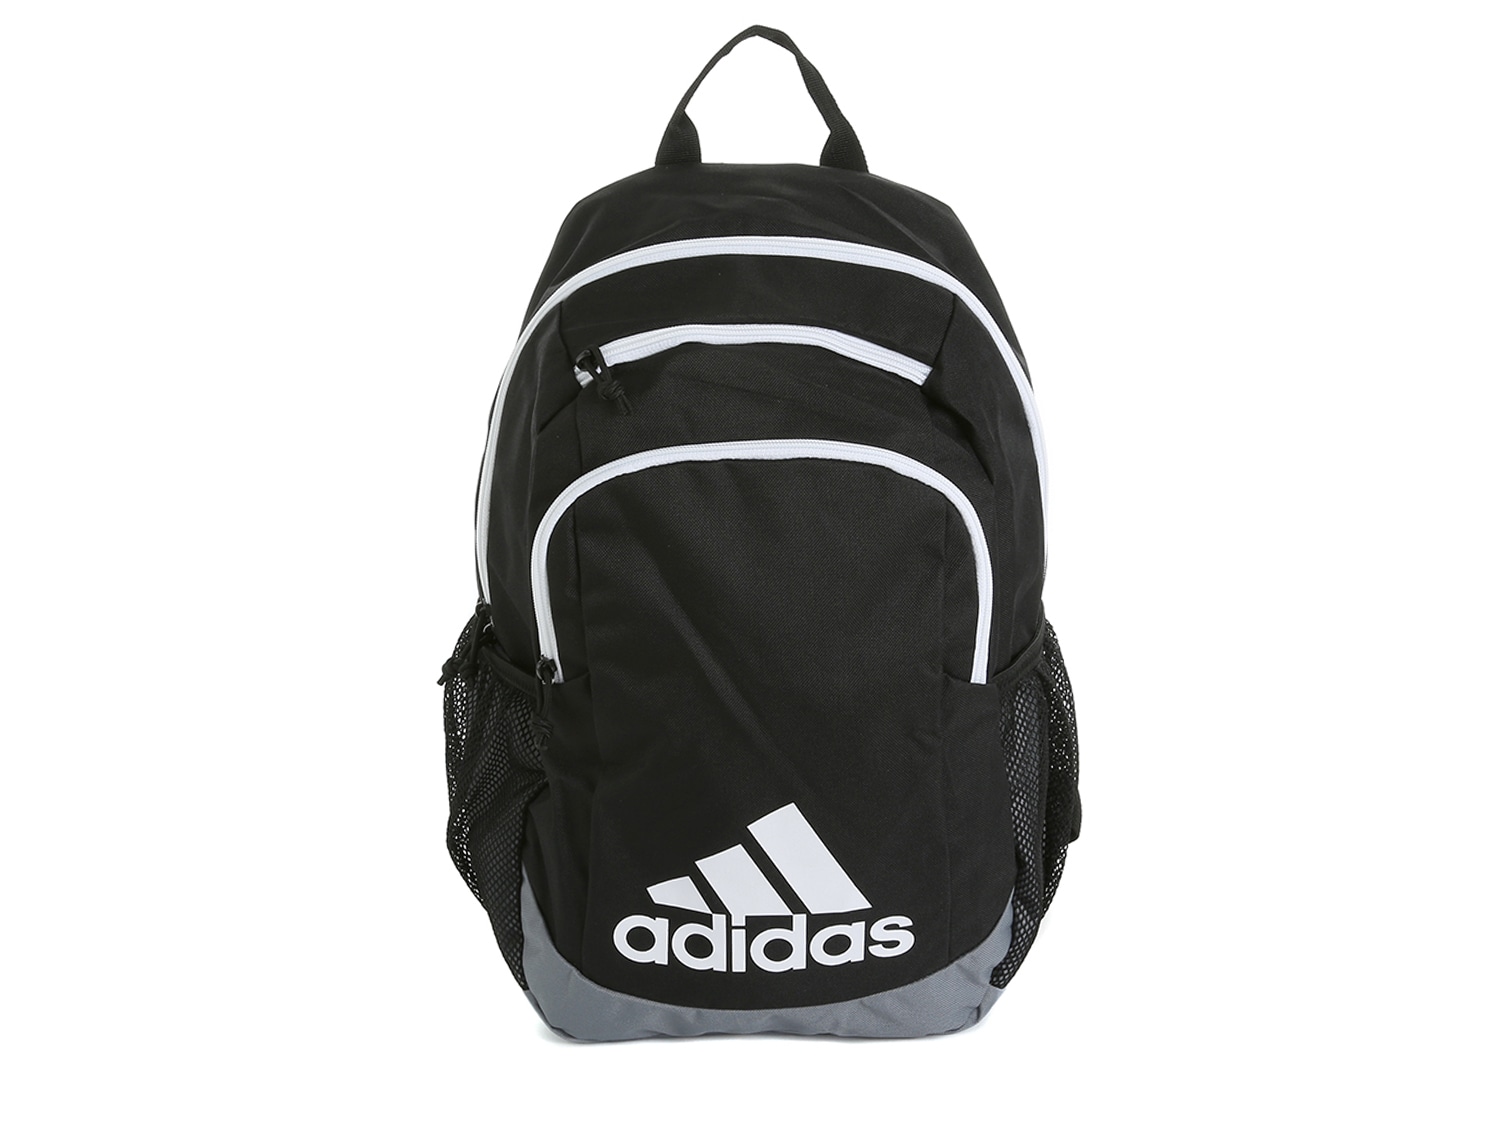 adidas young bts creator backpack